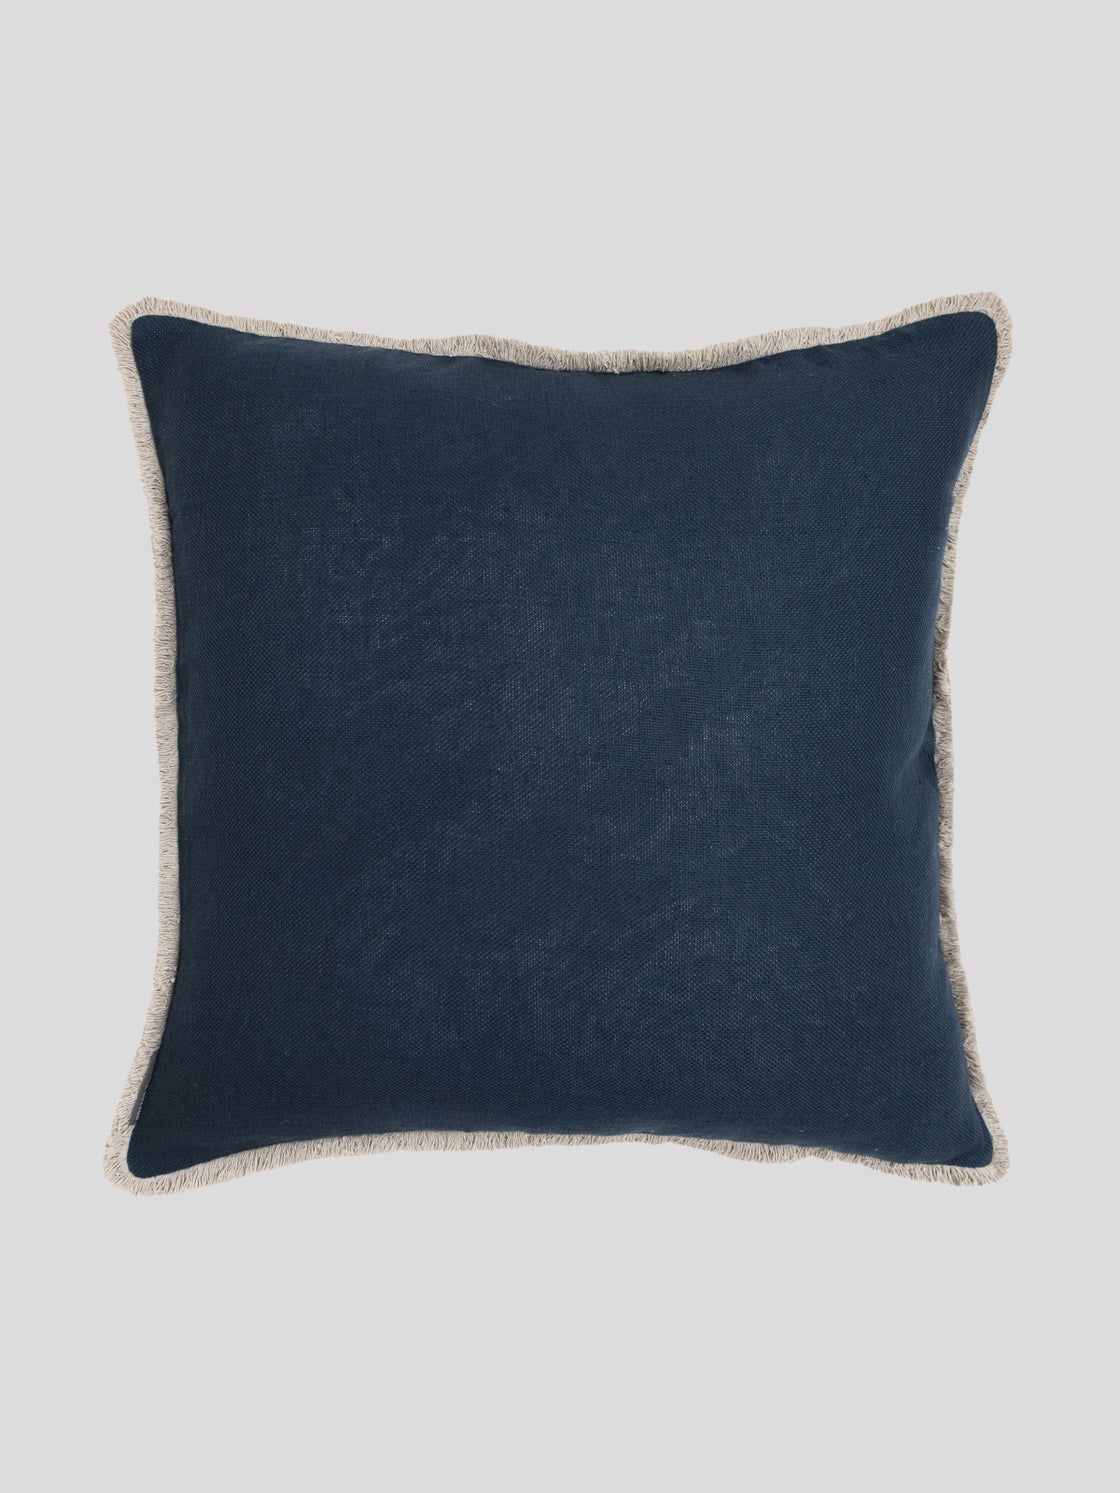 Terrace Cushion Cover in Navy | Wallace Cotton NZ